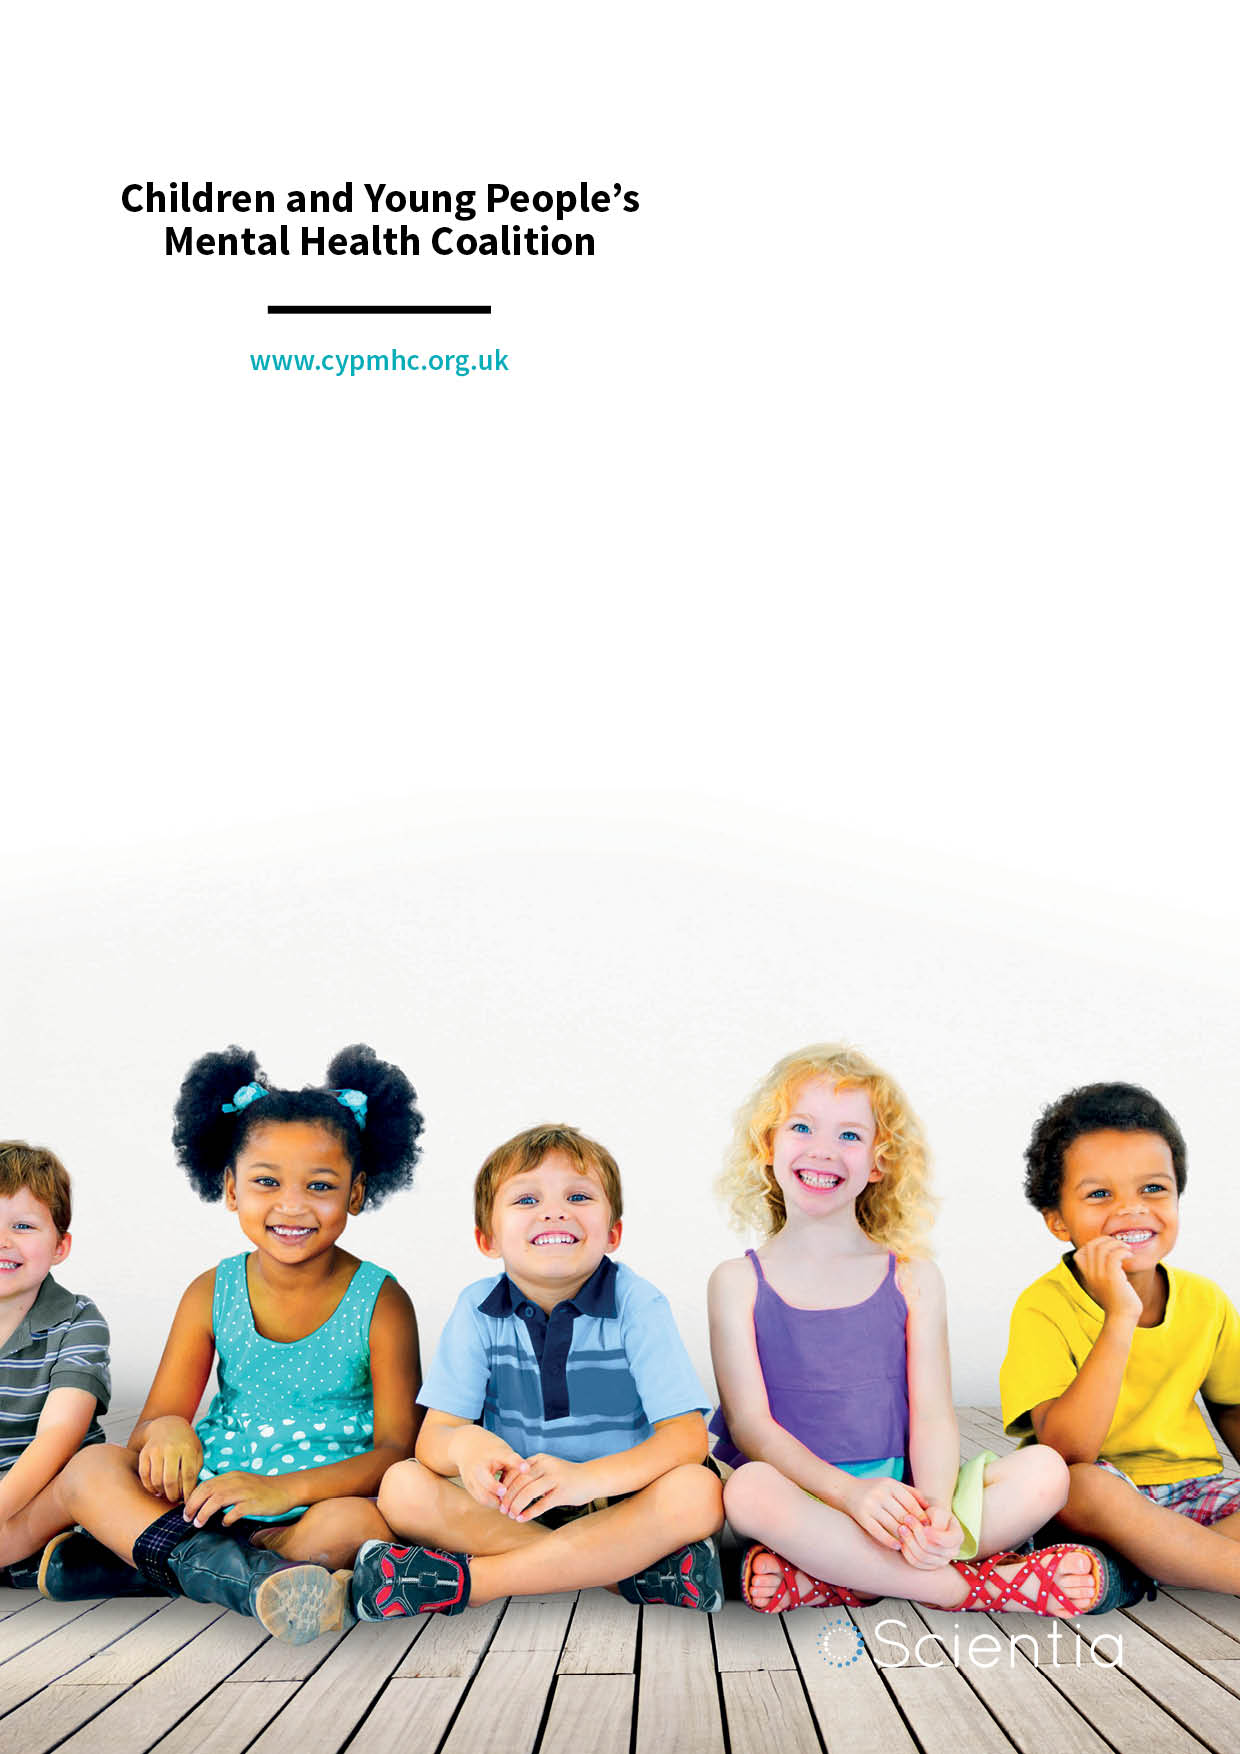 Children and Young People’s Mental Health Coalition